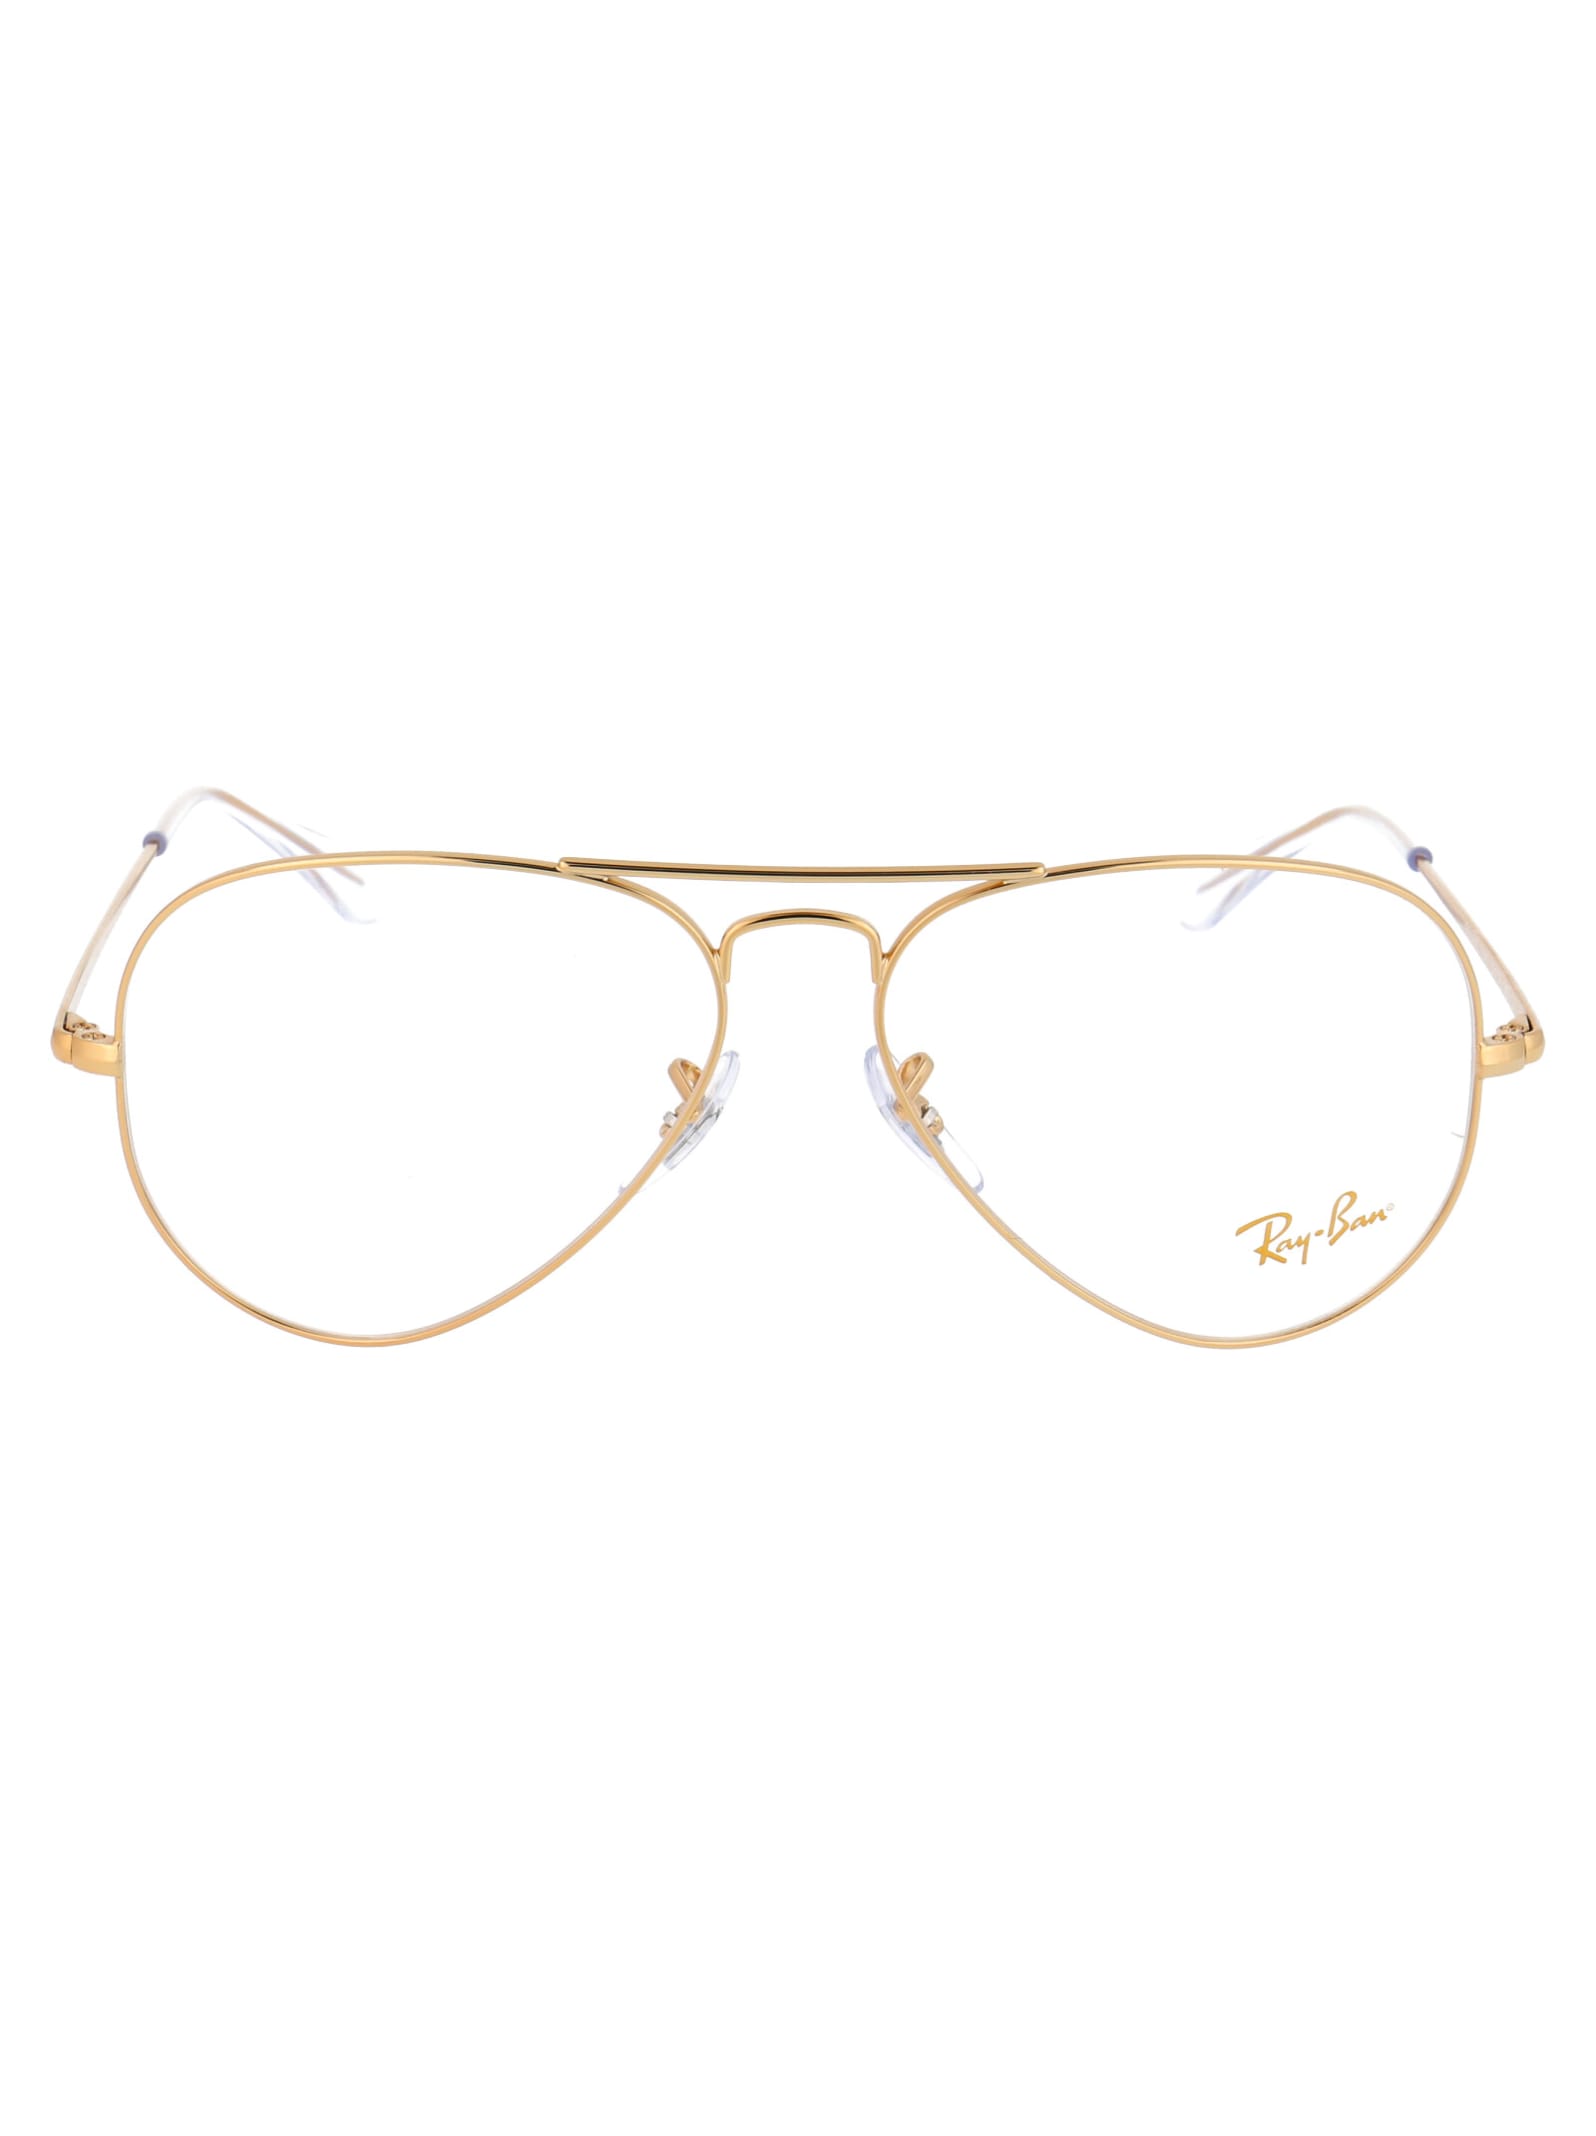 Ray Ban Aviator Glasses In 3086 Legend Gold